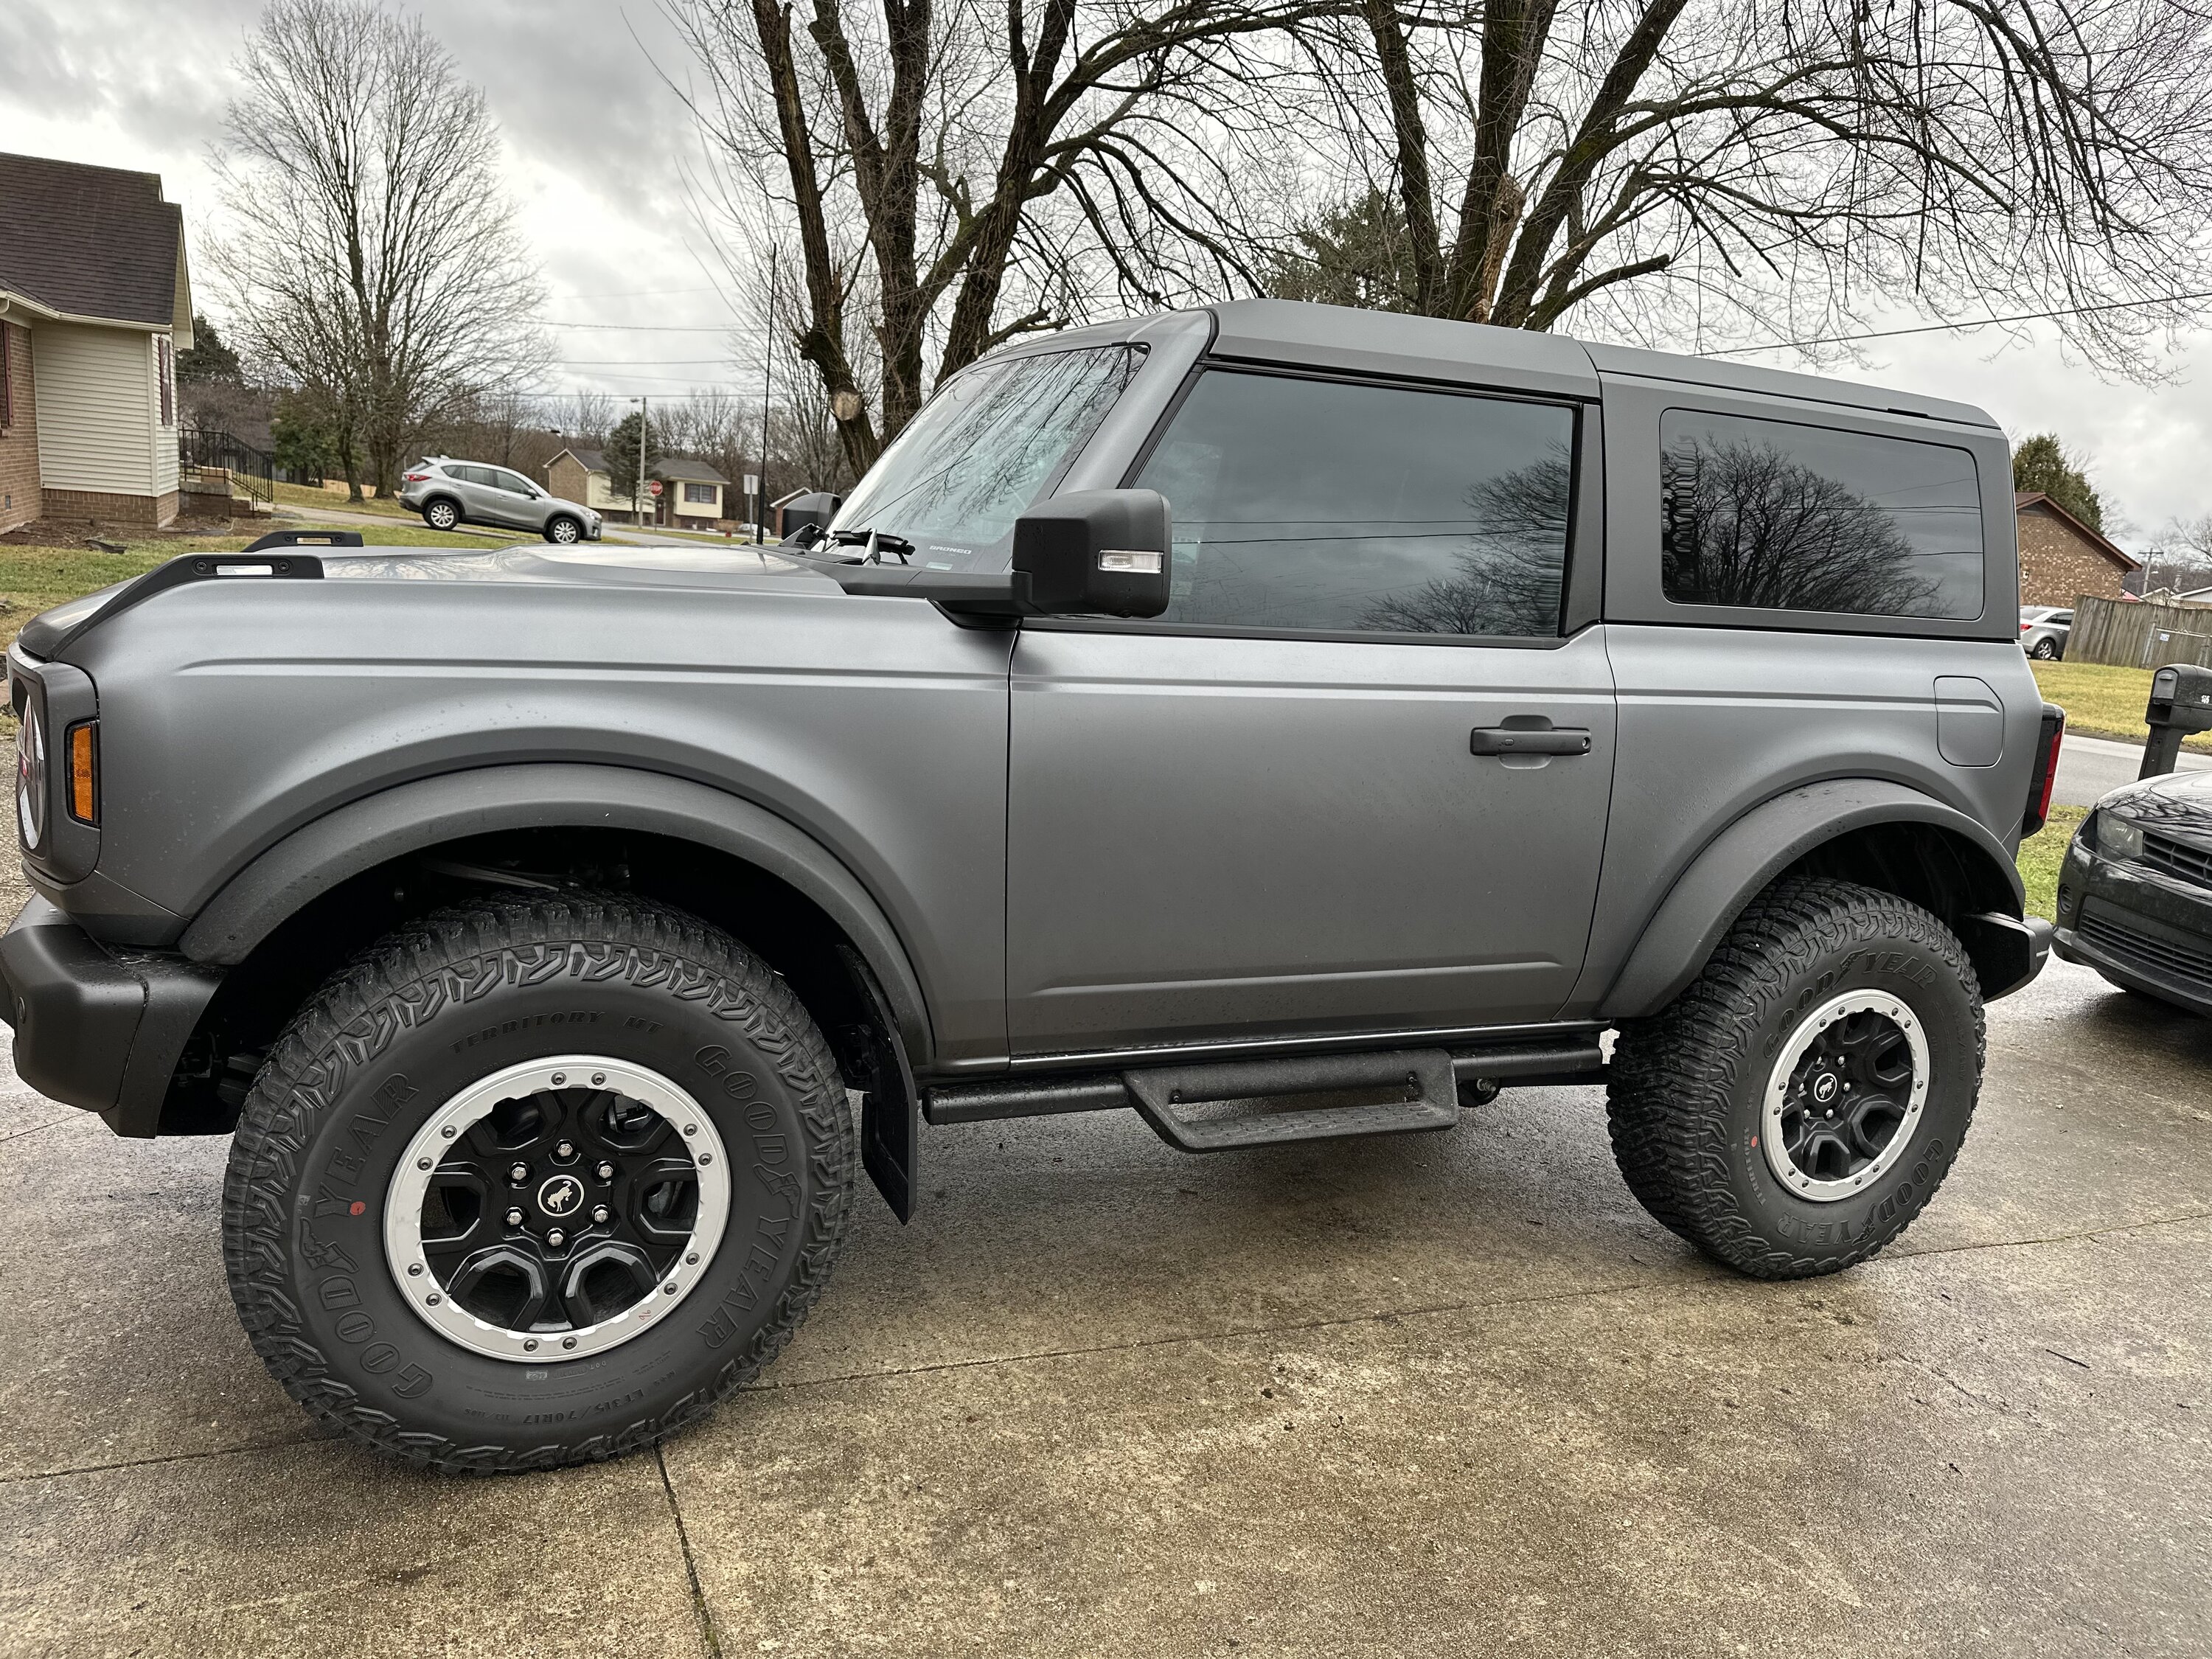 Ford Bronco XPEL Stealth PPF Wrap Completed on Bronco Raptor in Oxford White Stealth Outside